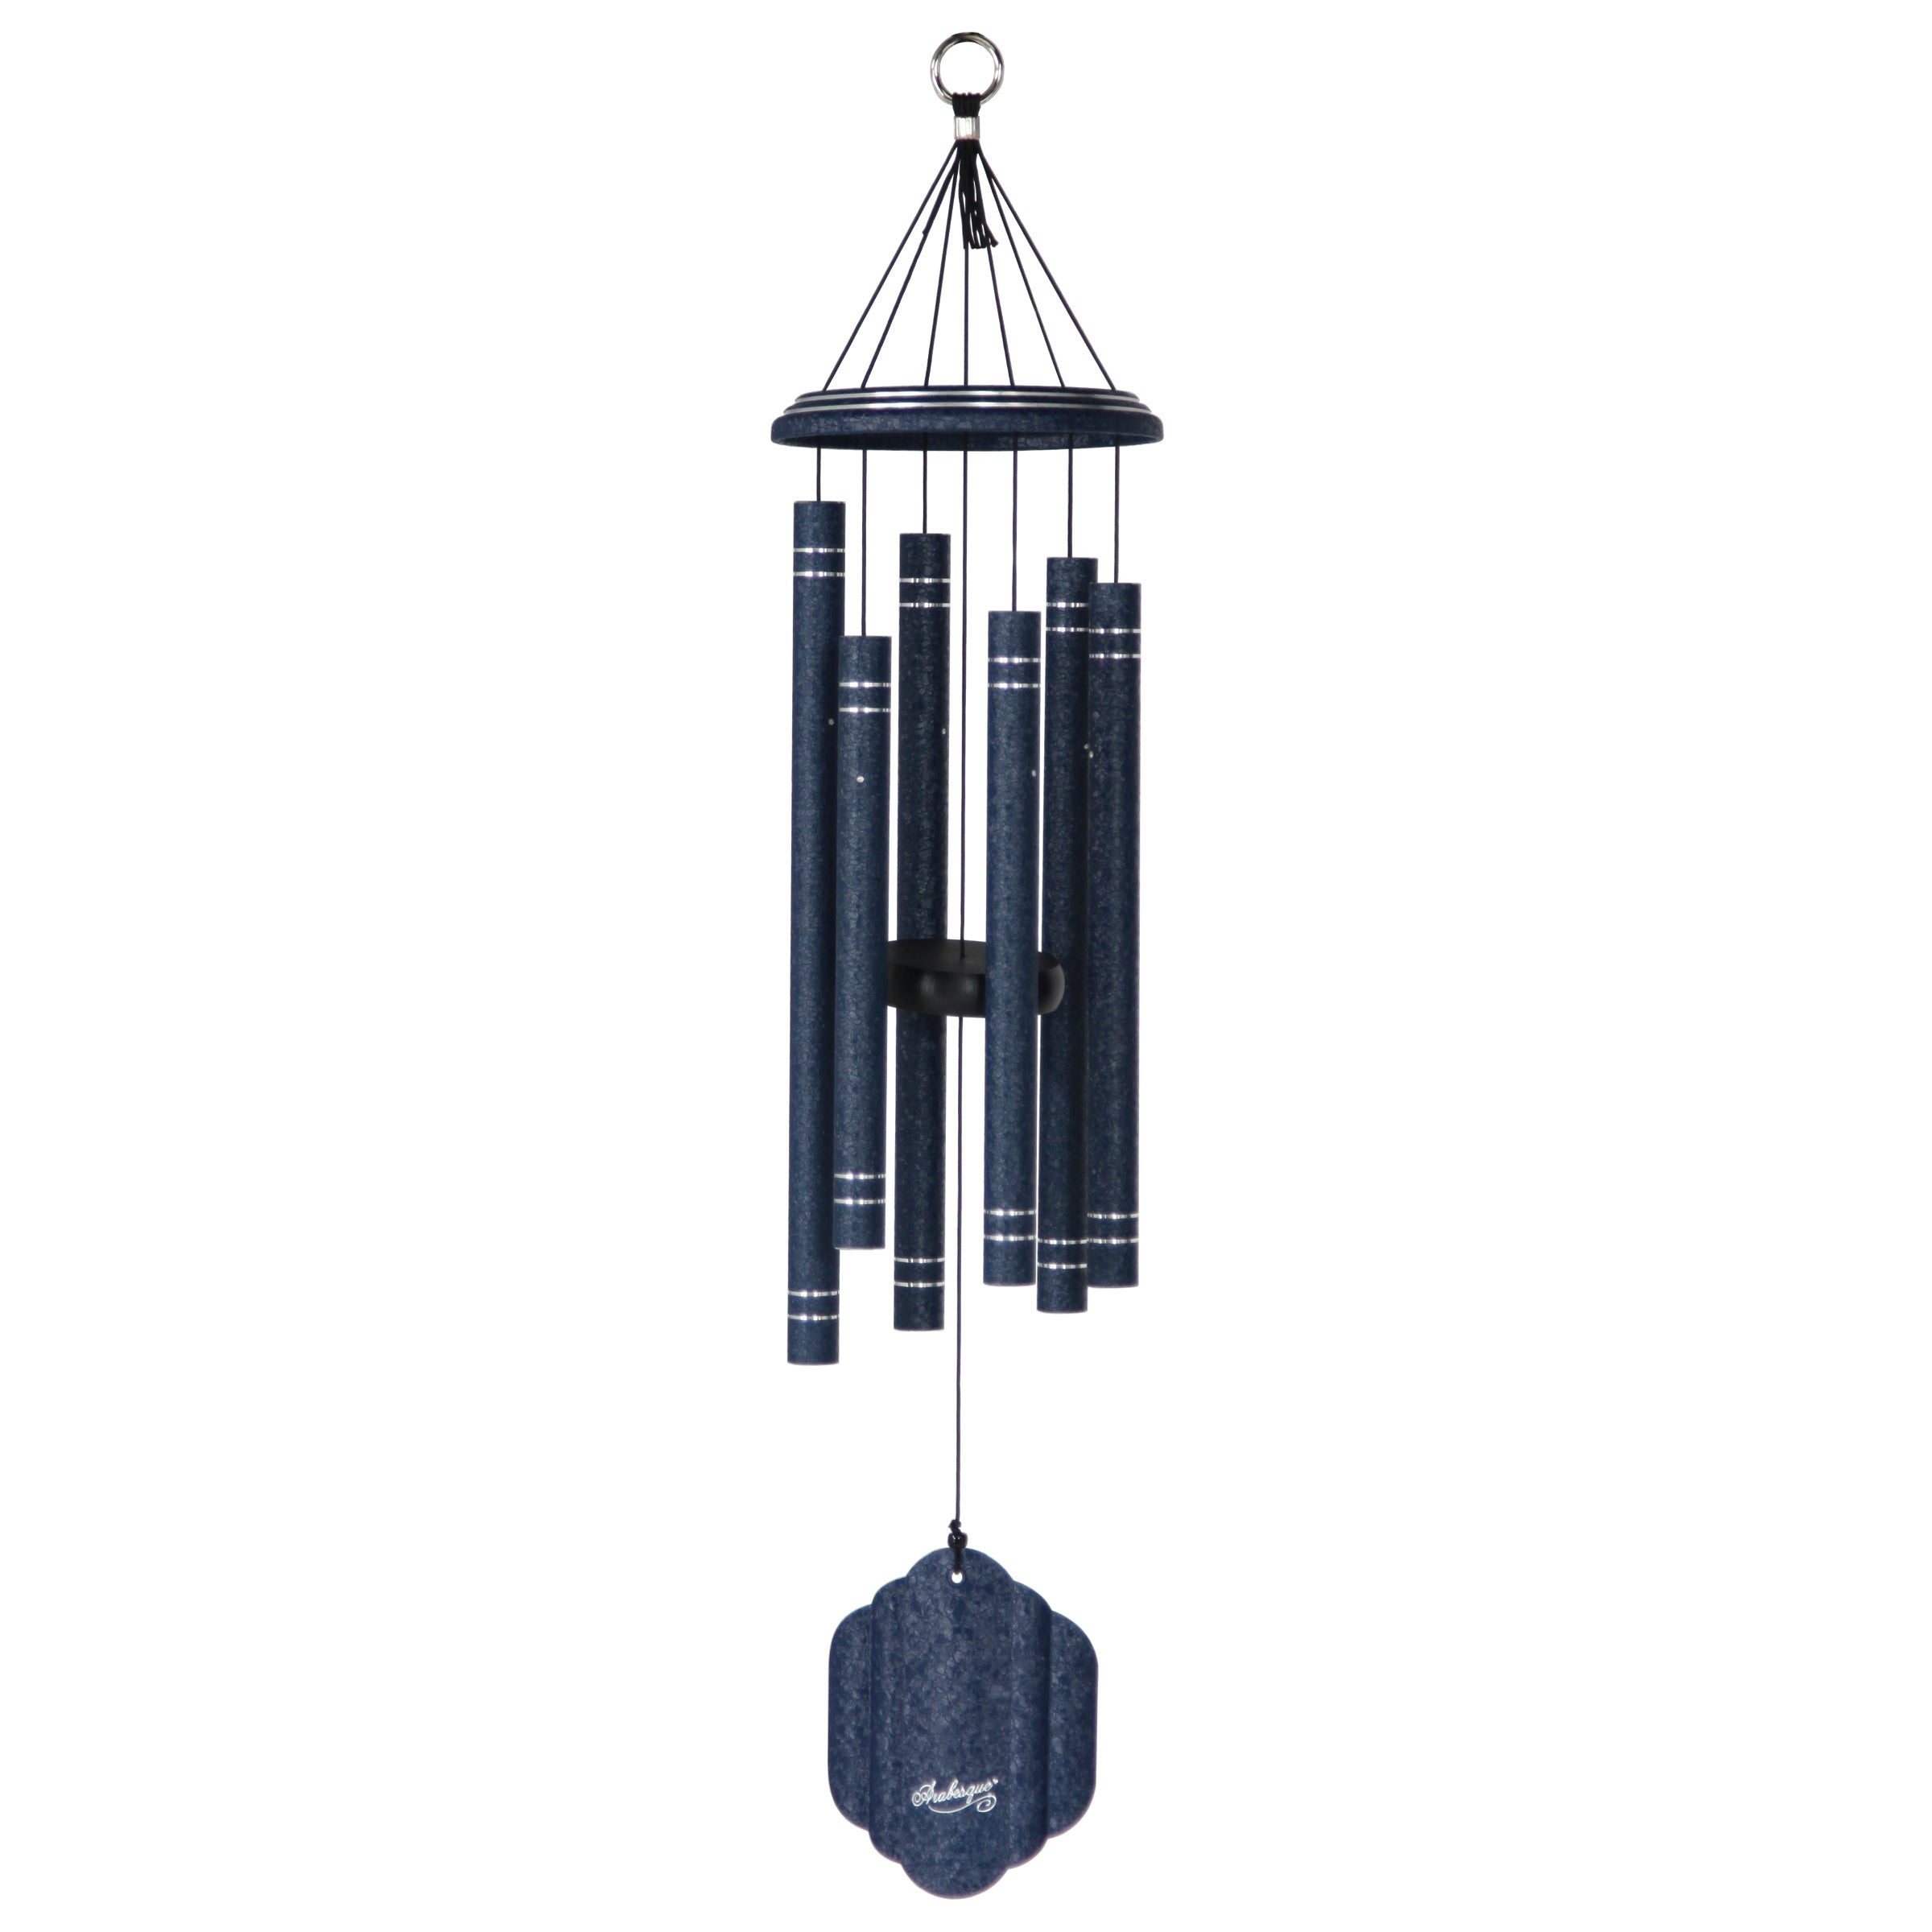 Wind River Arabesque ® 32-inch wind chimes